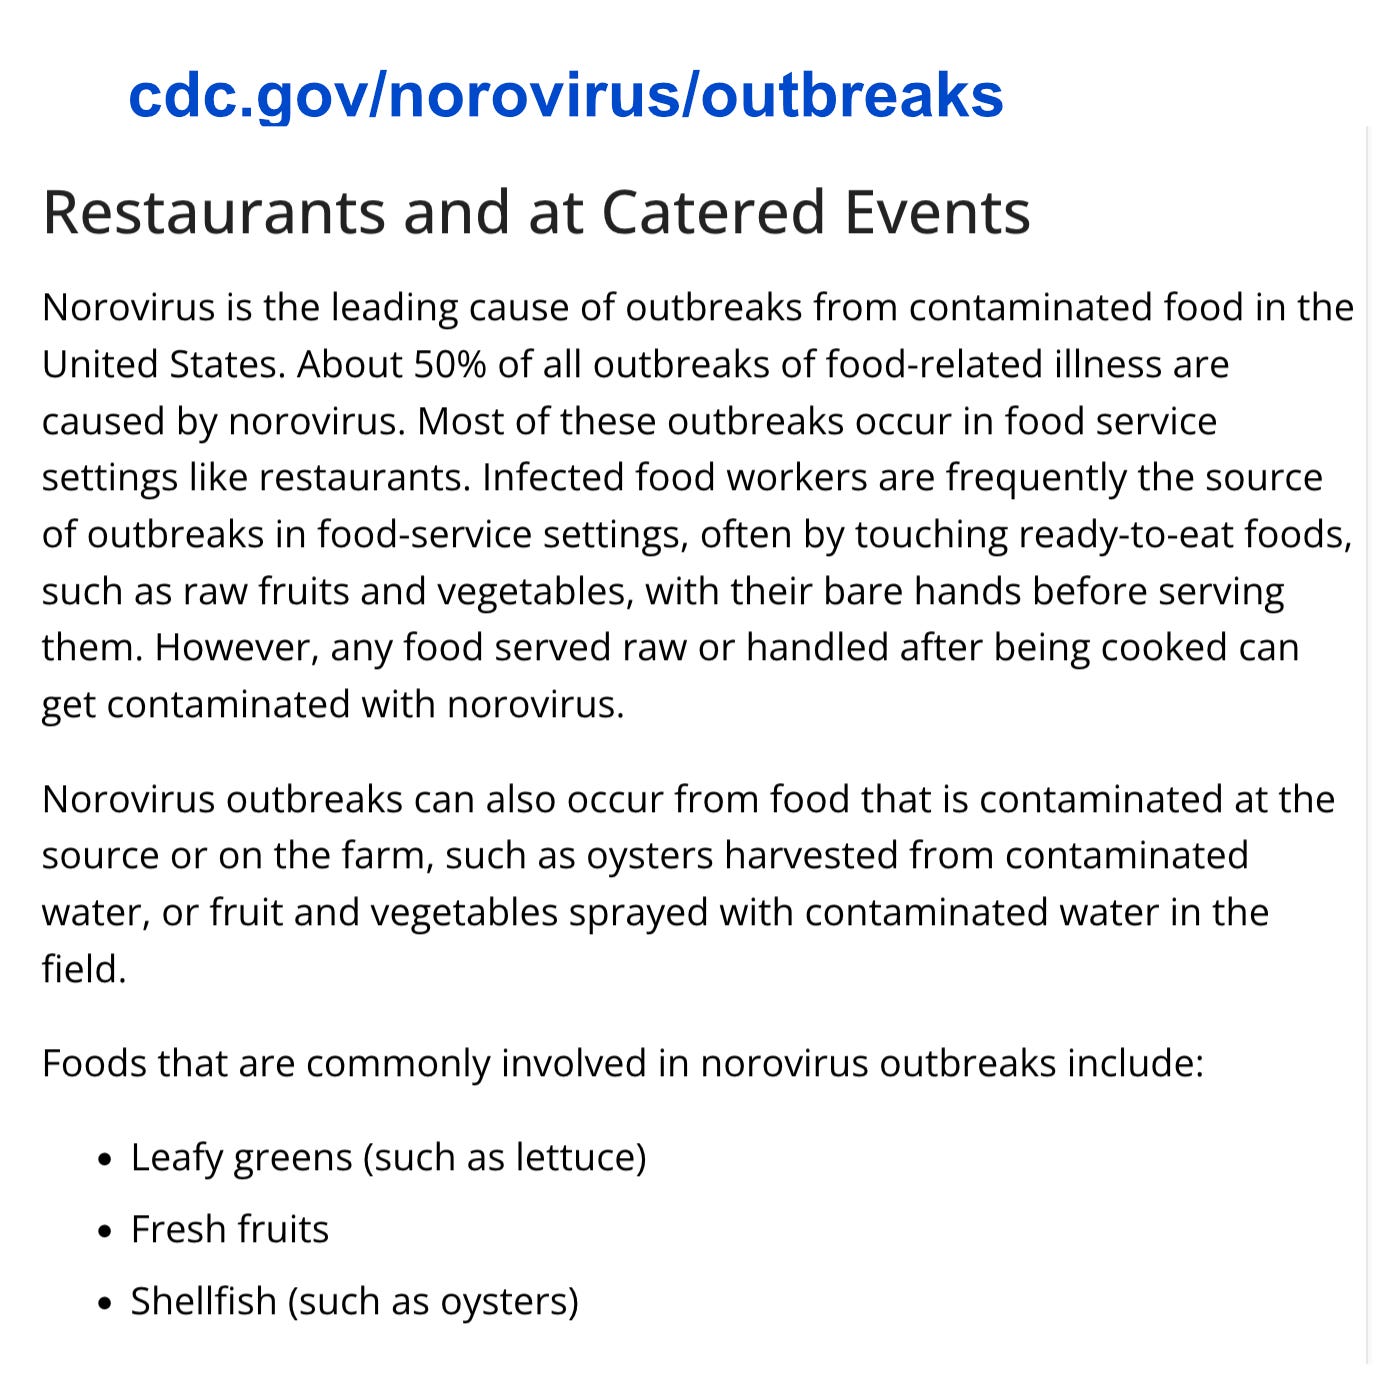 cdc.gov/norovirus/outbreaks/common-settings.html and at Catered Events Norovirus is the leading cause of outbreaks from contaminated food in the United States. About 50% of all outbreaks of food-related illness are caused by norovirus. Most of these outbreaks occur in food service settings like restaurants. Infected food workers are frequently the source of outbreaks in food-service settings, often by touching ready-to-eat foods, such as raw fruits and vegetables, with their bare hands before serving them. However, any food served raw or handled after being cooked can get contaminated with norovirus. Norovirus outbreaks can also occur from food that is contaminated at the source or on the farm, such as oysters harvested from contaminated water, or fruit and vegetables sprayed with contaminated water in the field. Foods that are commonly involved in norovirus outbreaks include: Leafy greens (such as lettuce) Fresh fruits Shellfish (such as oysters)